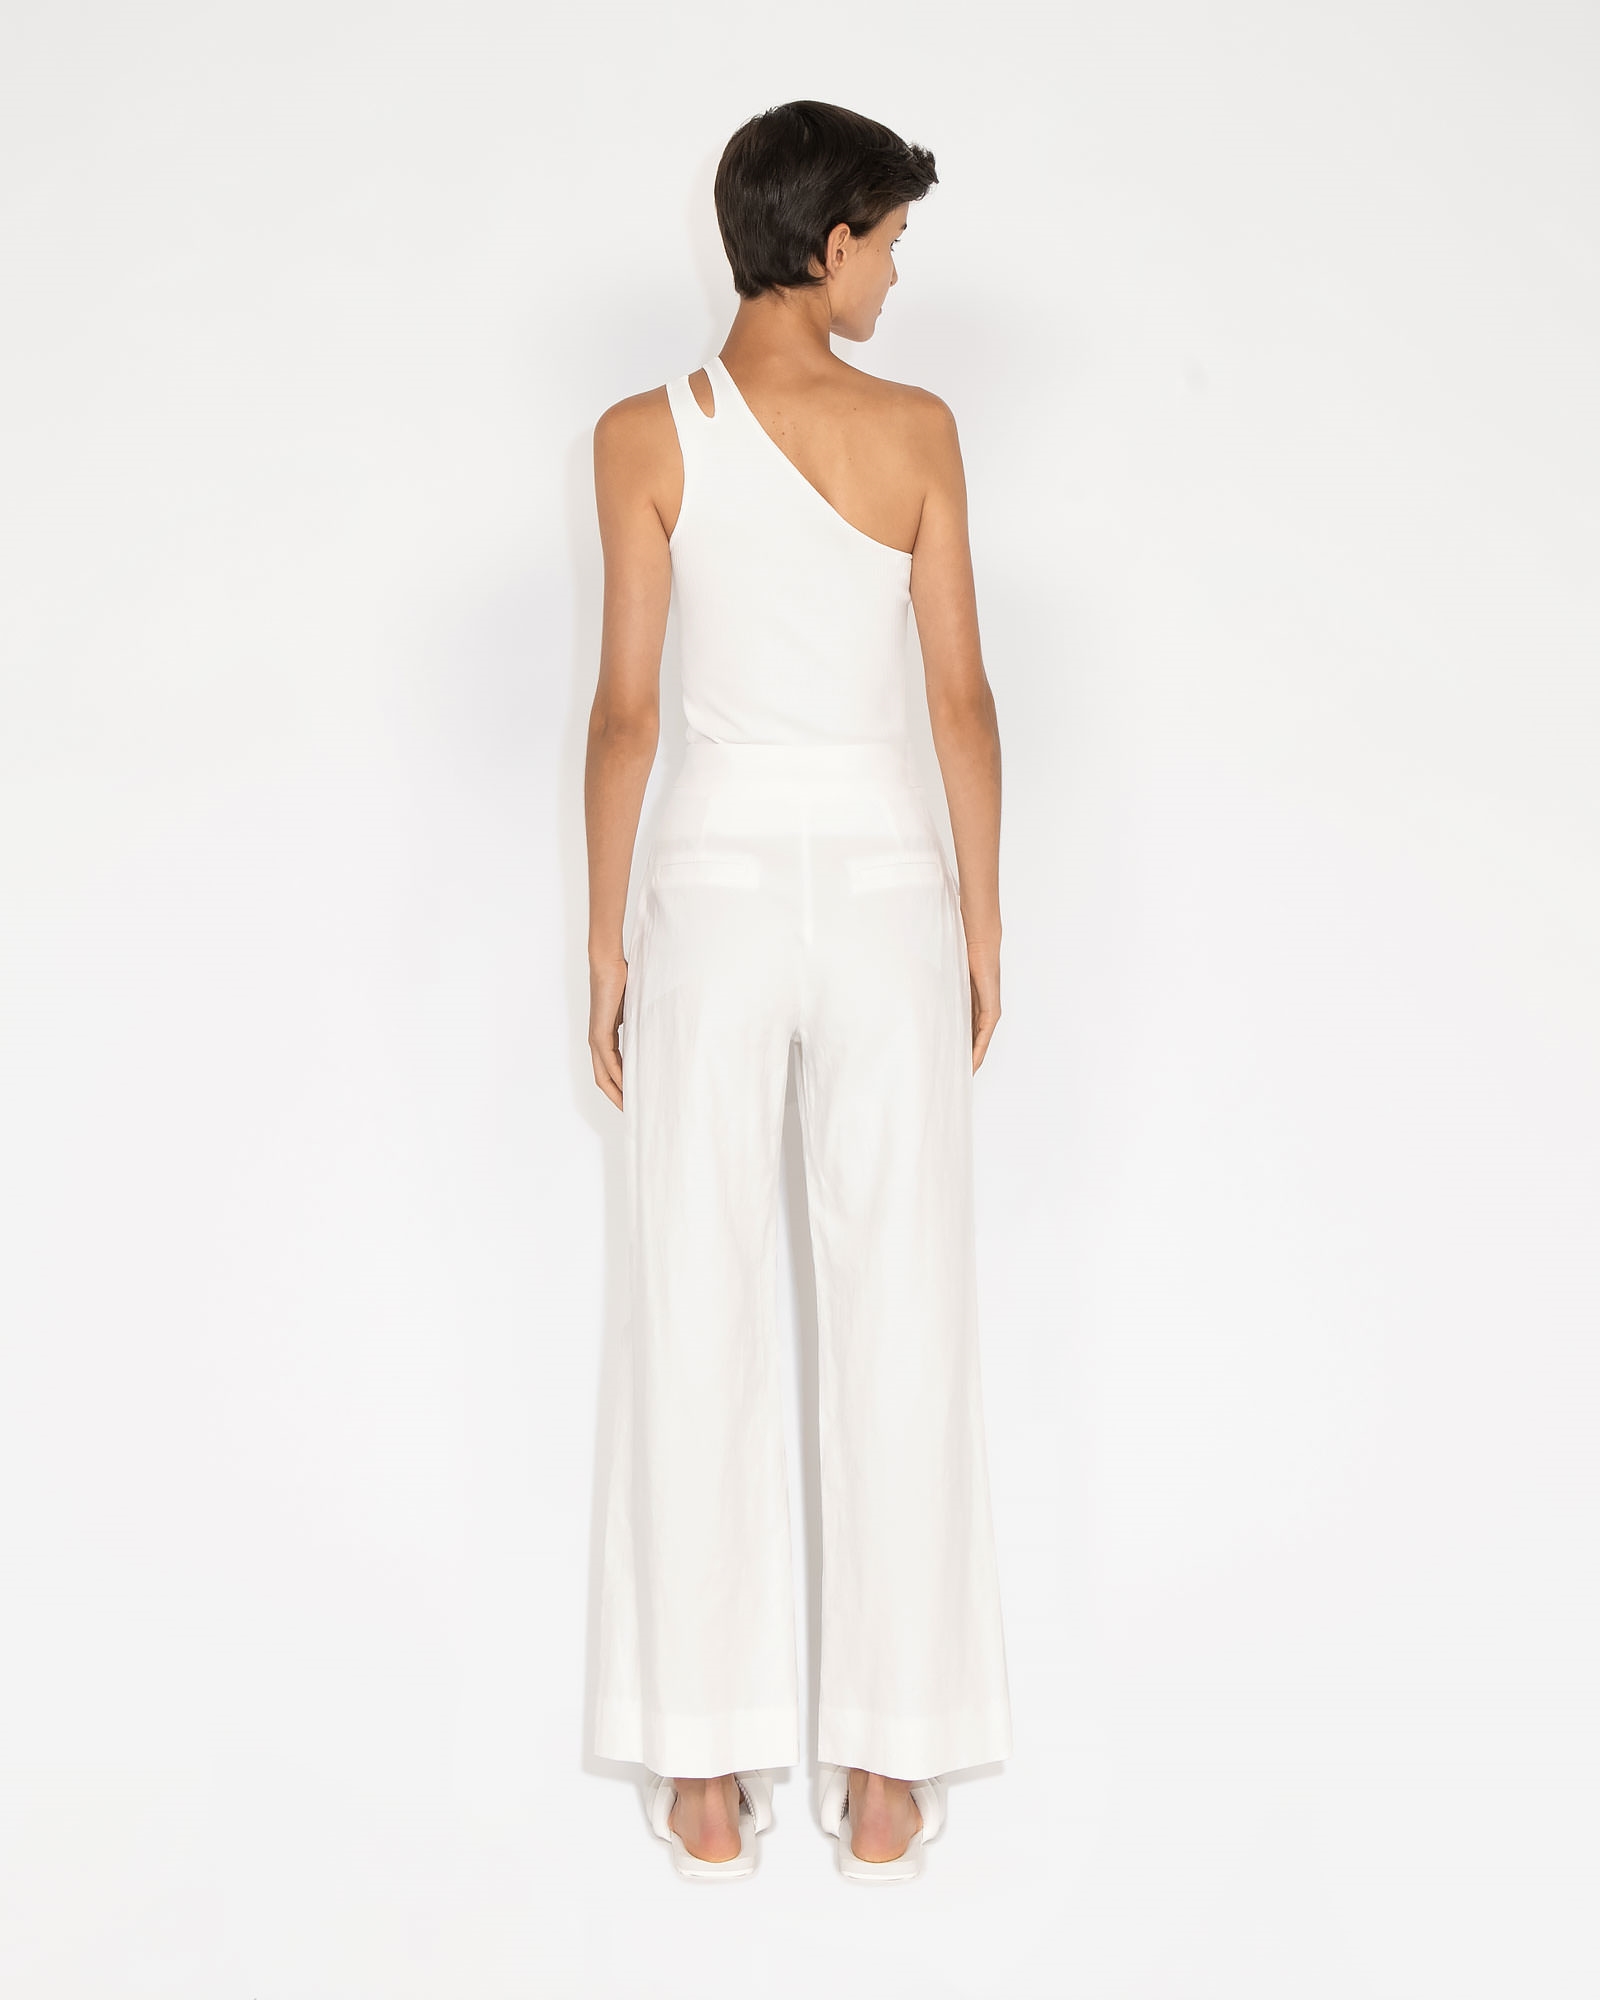 Knitwear | One Shoulder Cut Out Knit | 110 Off White